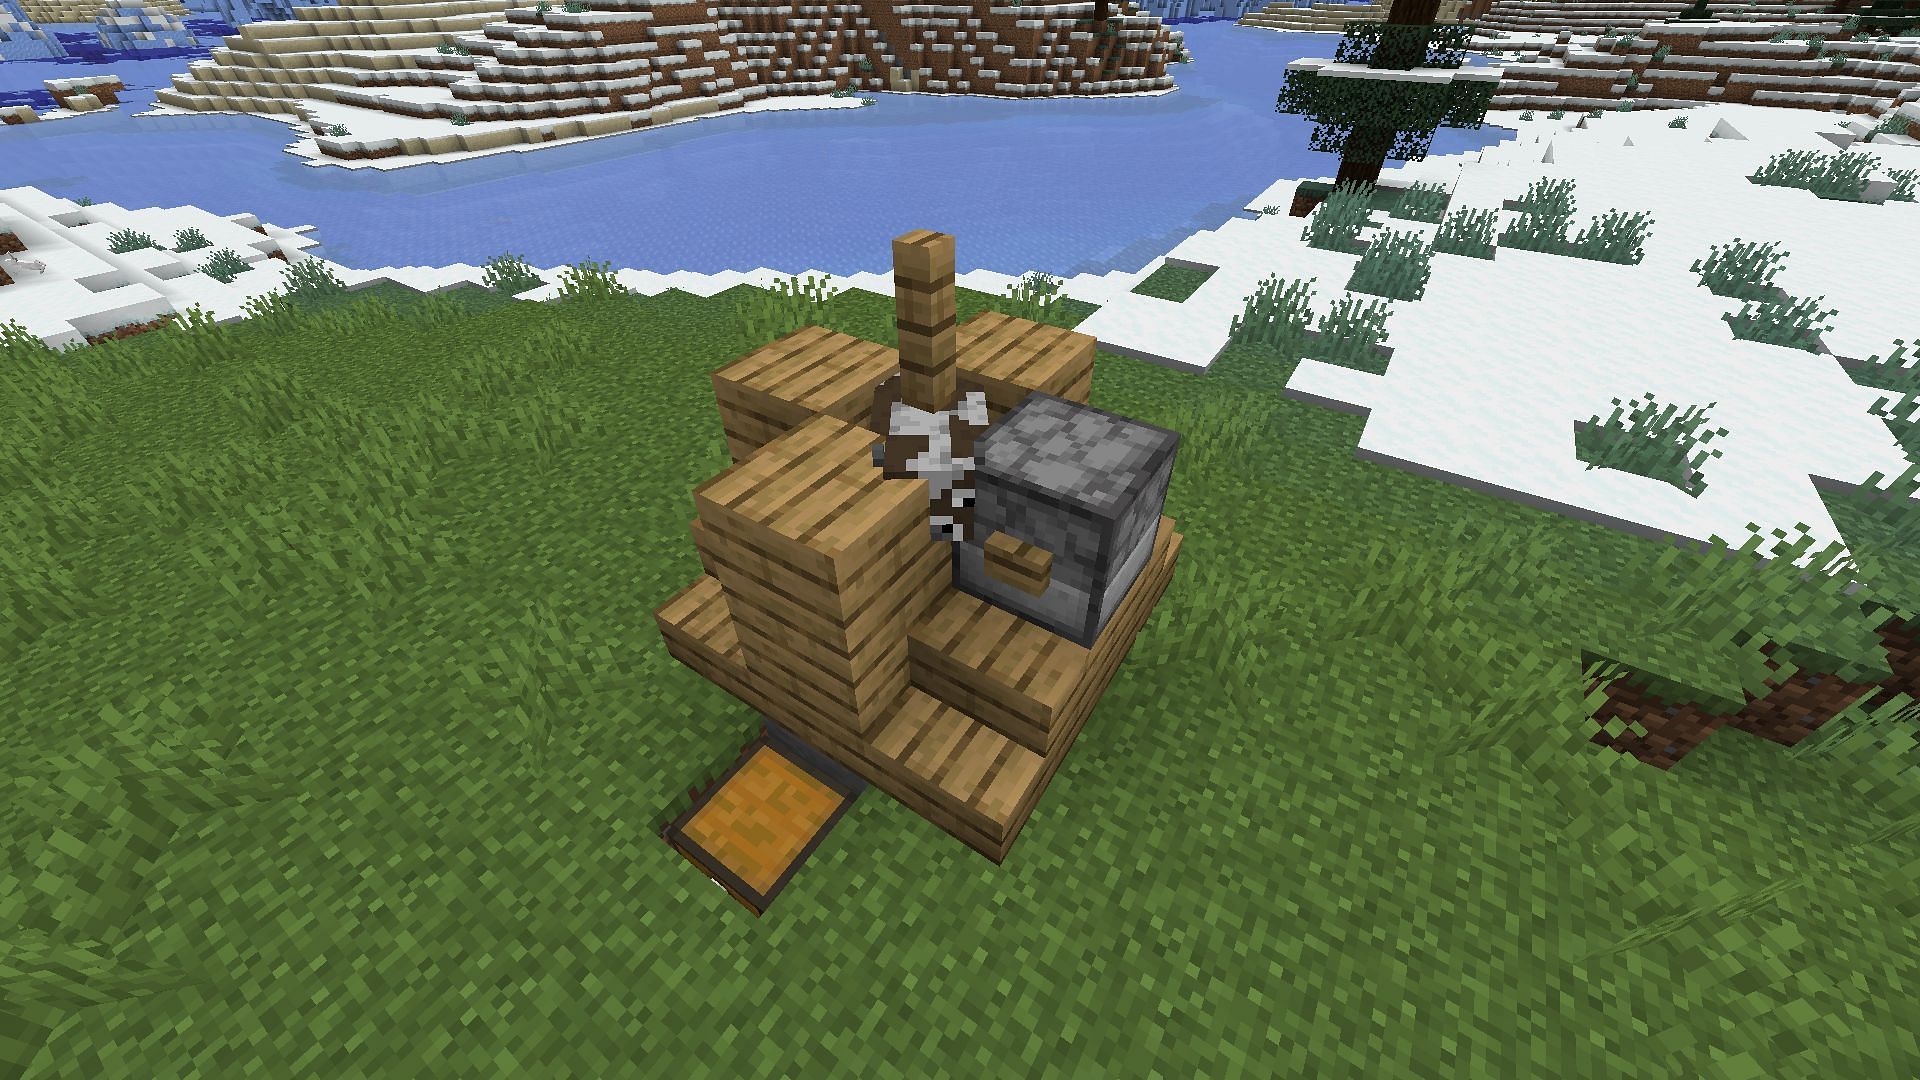 This Minecraft farm uses entity cramming to collect leather and beef (Image via Mojang)